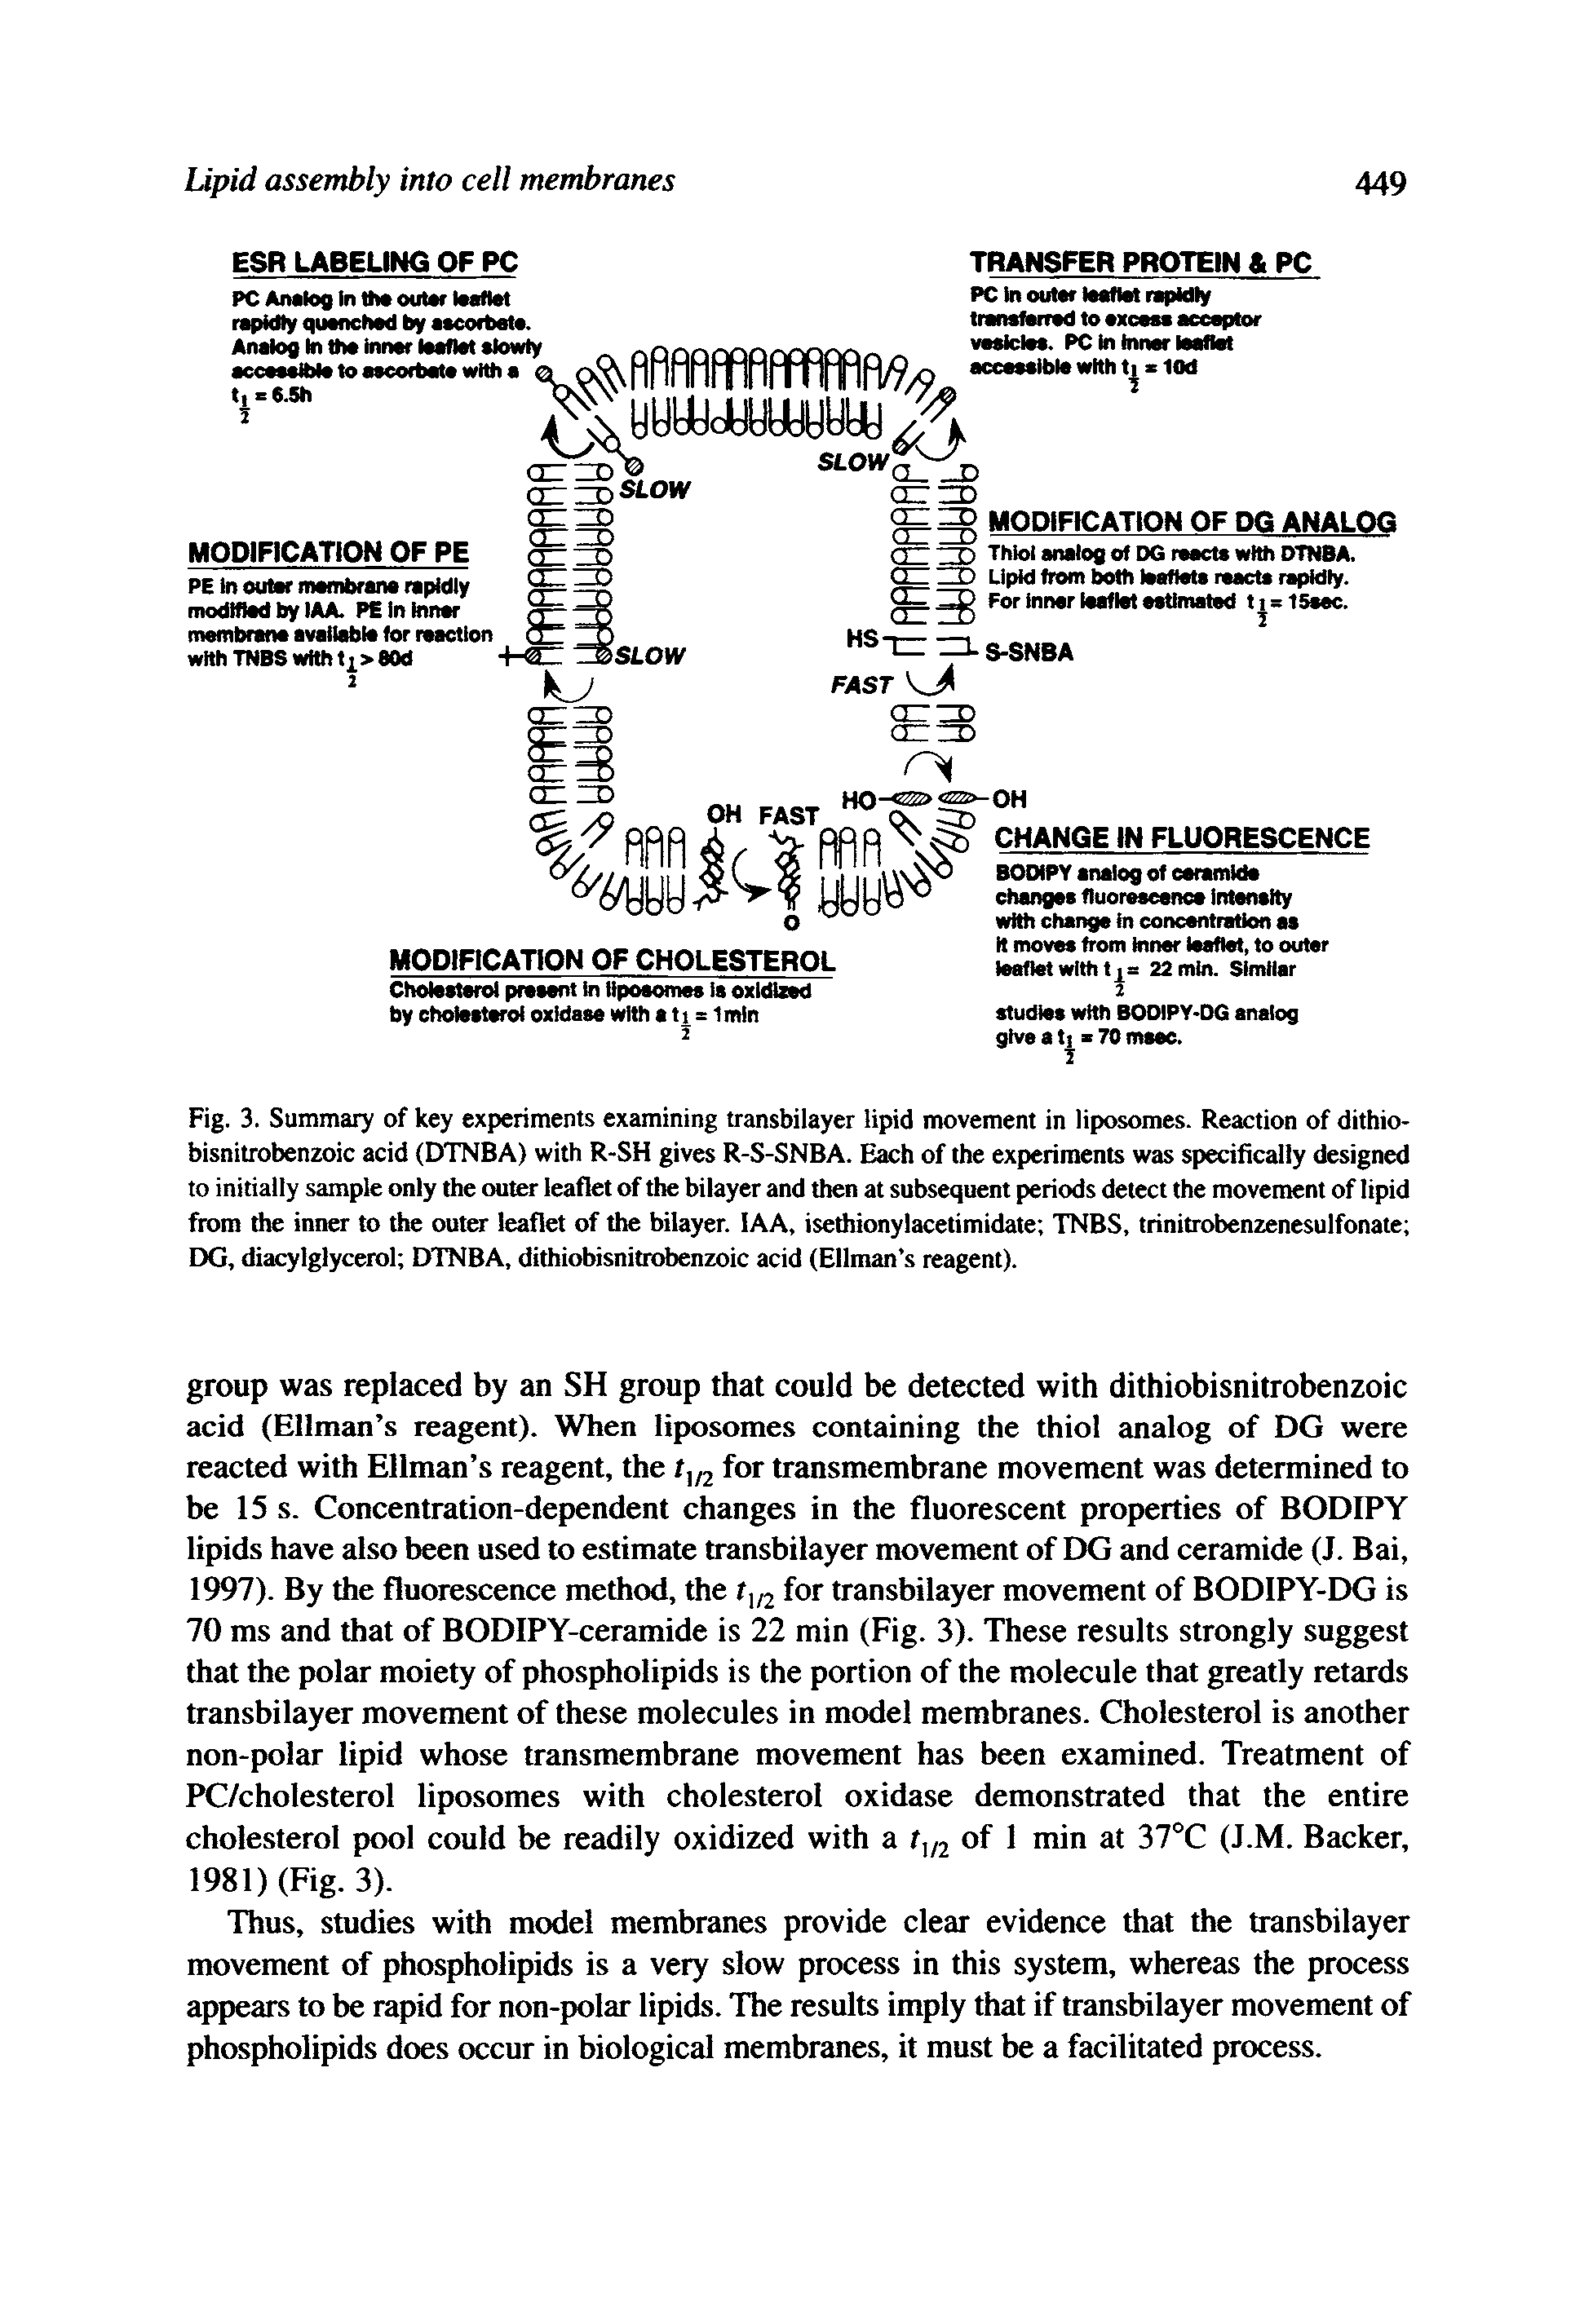 Fig. 3. Summary of key experiments examining transbilayer lipid movement in liposomes. Reaction of dithio-bisnitrobenzoic acid (DTNBA) with R-SH gives R-S-SNBA. Each of the experiments was specifically designed to initially sample only the outer leaflet of the bilayer and then at subsequent periods detect the movement of lipid from the inner to the outer leaflet of the bilayer. lAA, isethionylacetimidate TNBS, trinitrobenzenesulfonate DG, diacylglycerol DTNBA, dithiobisnitrobenzoic acid (Ellman s reagent).